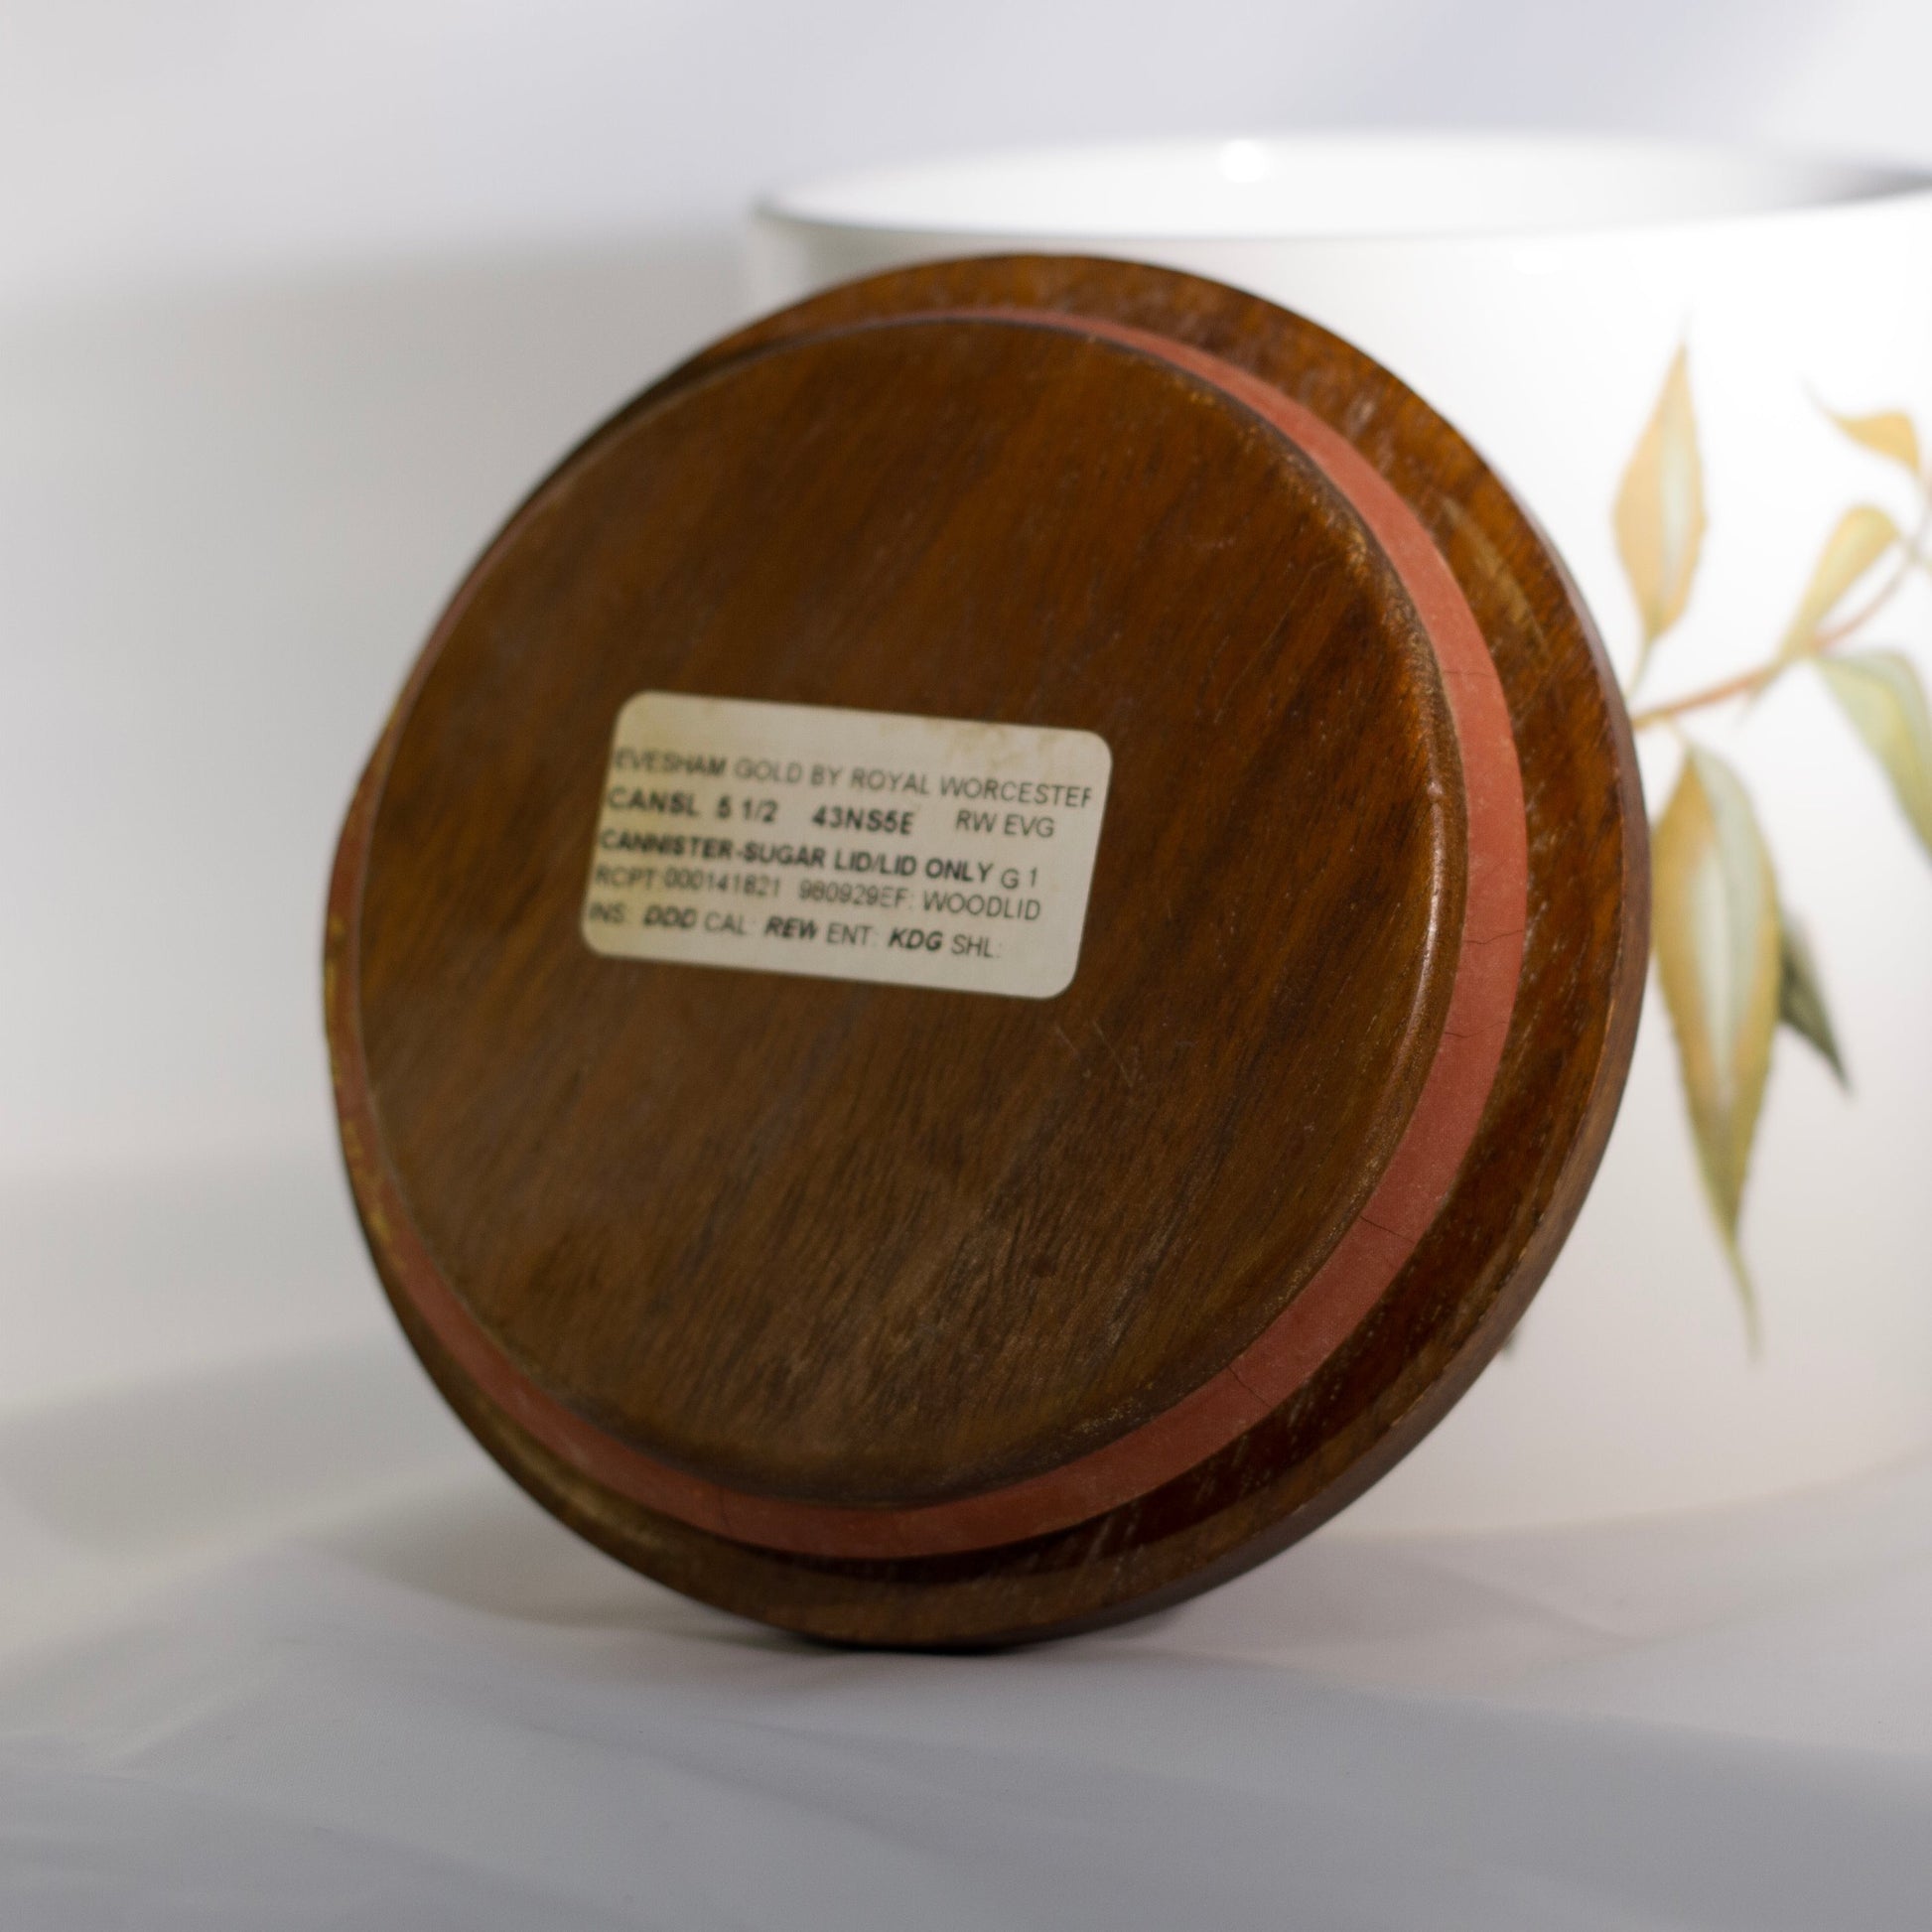 EVESHAM GOLD 5 ½" Sugar Canister with Wood Lid